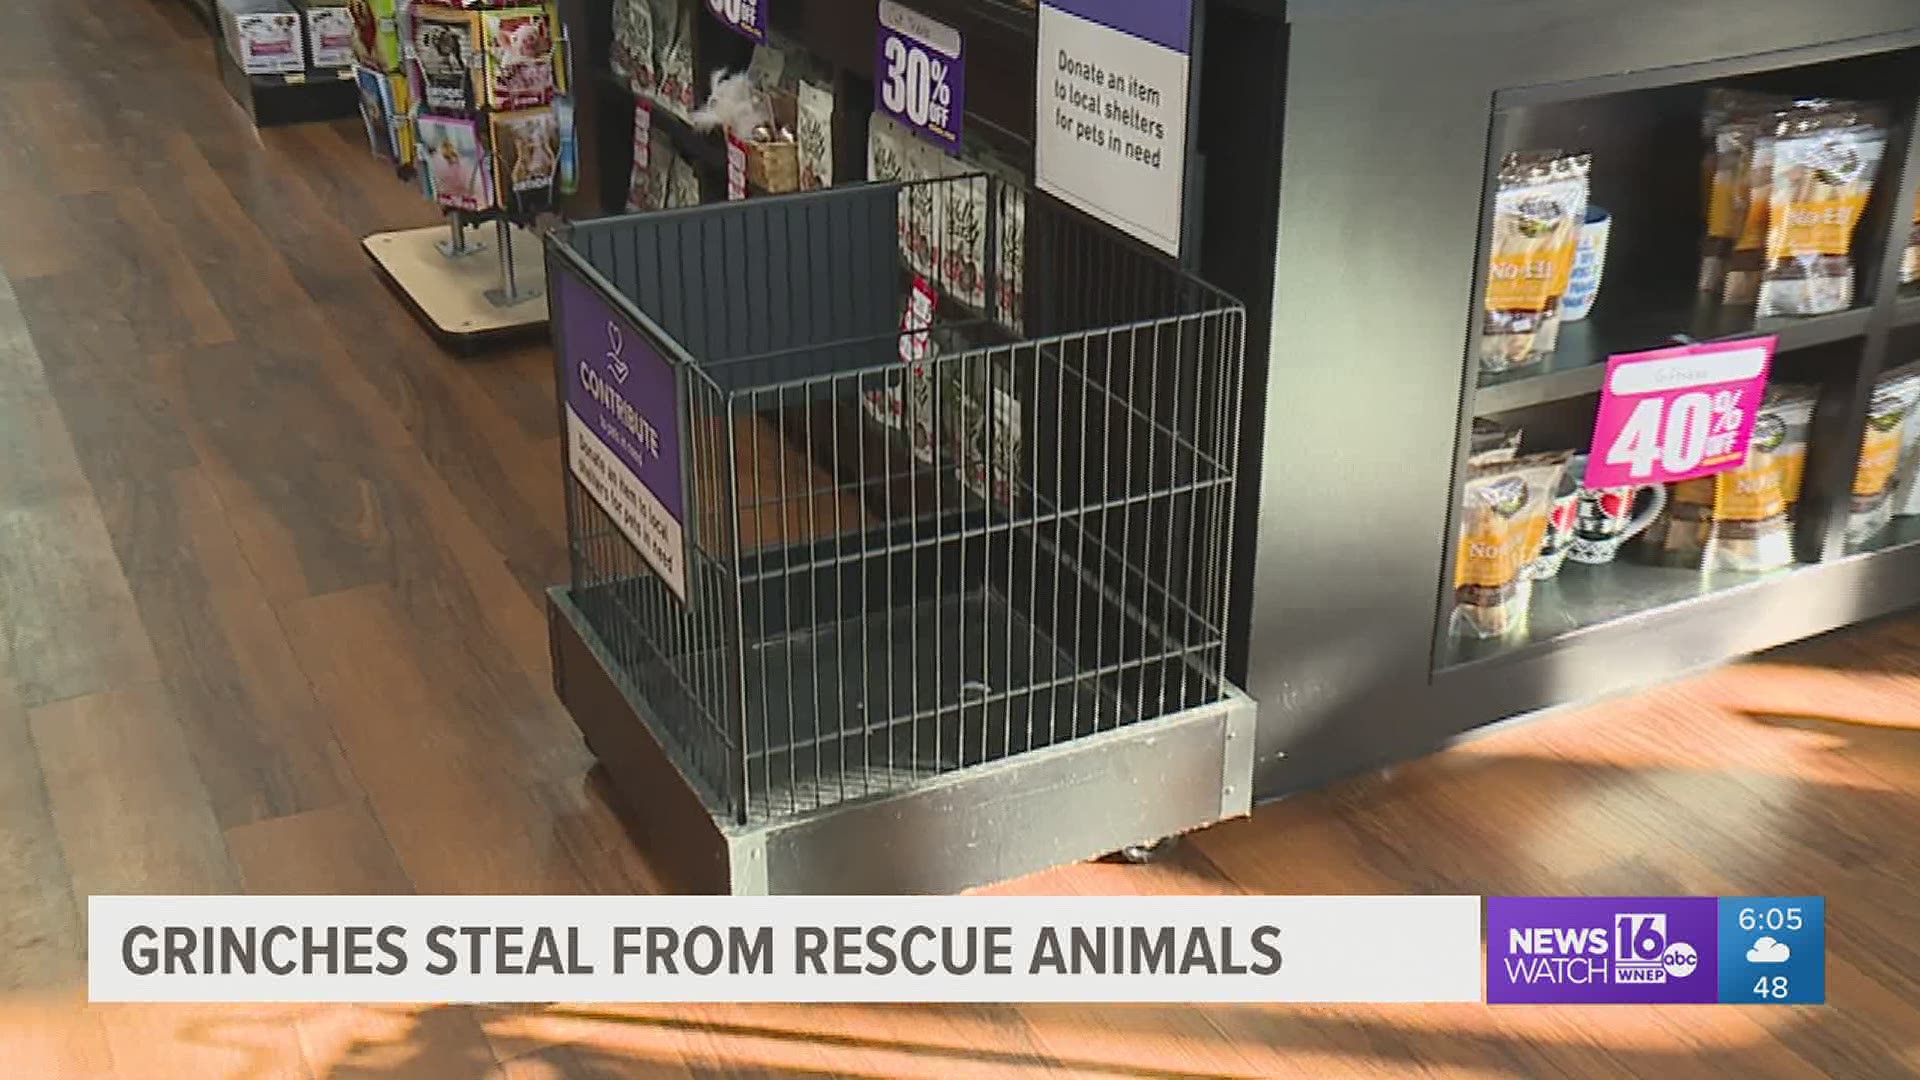 Who would steal from rescue pets? That's what volunteers are asking after contributions for their nonprofit disappeared from a donation bin inside a store.